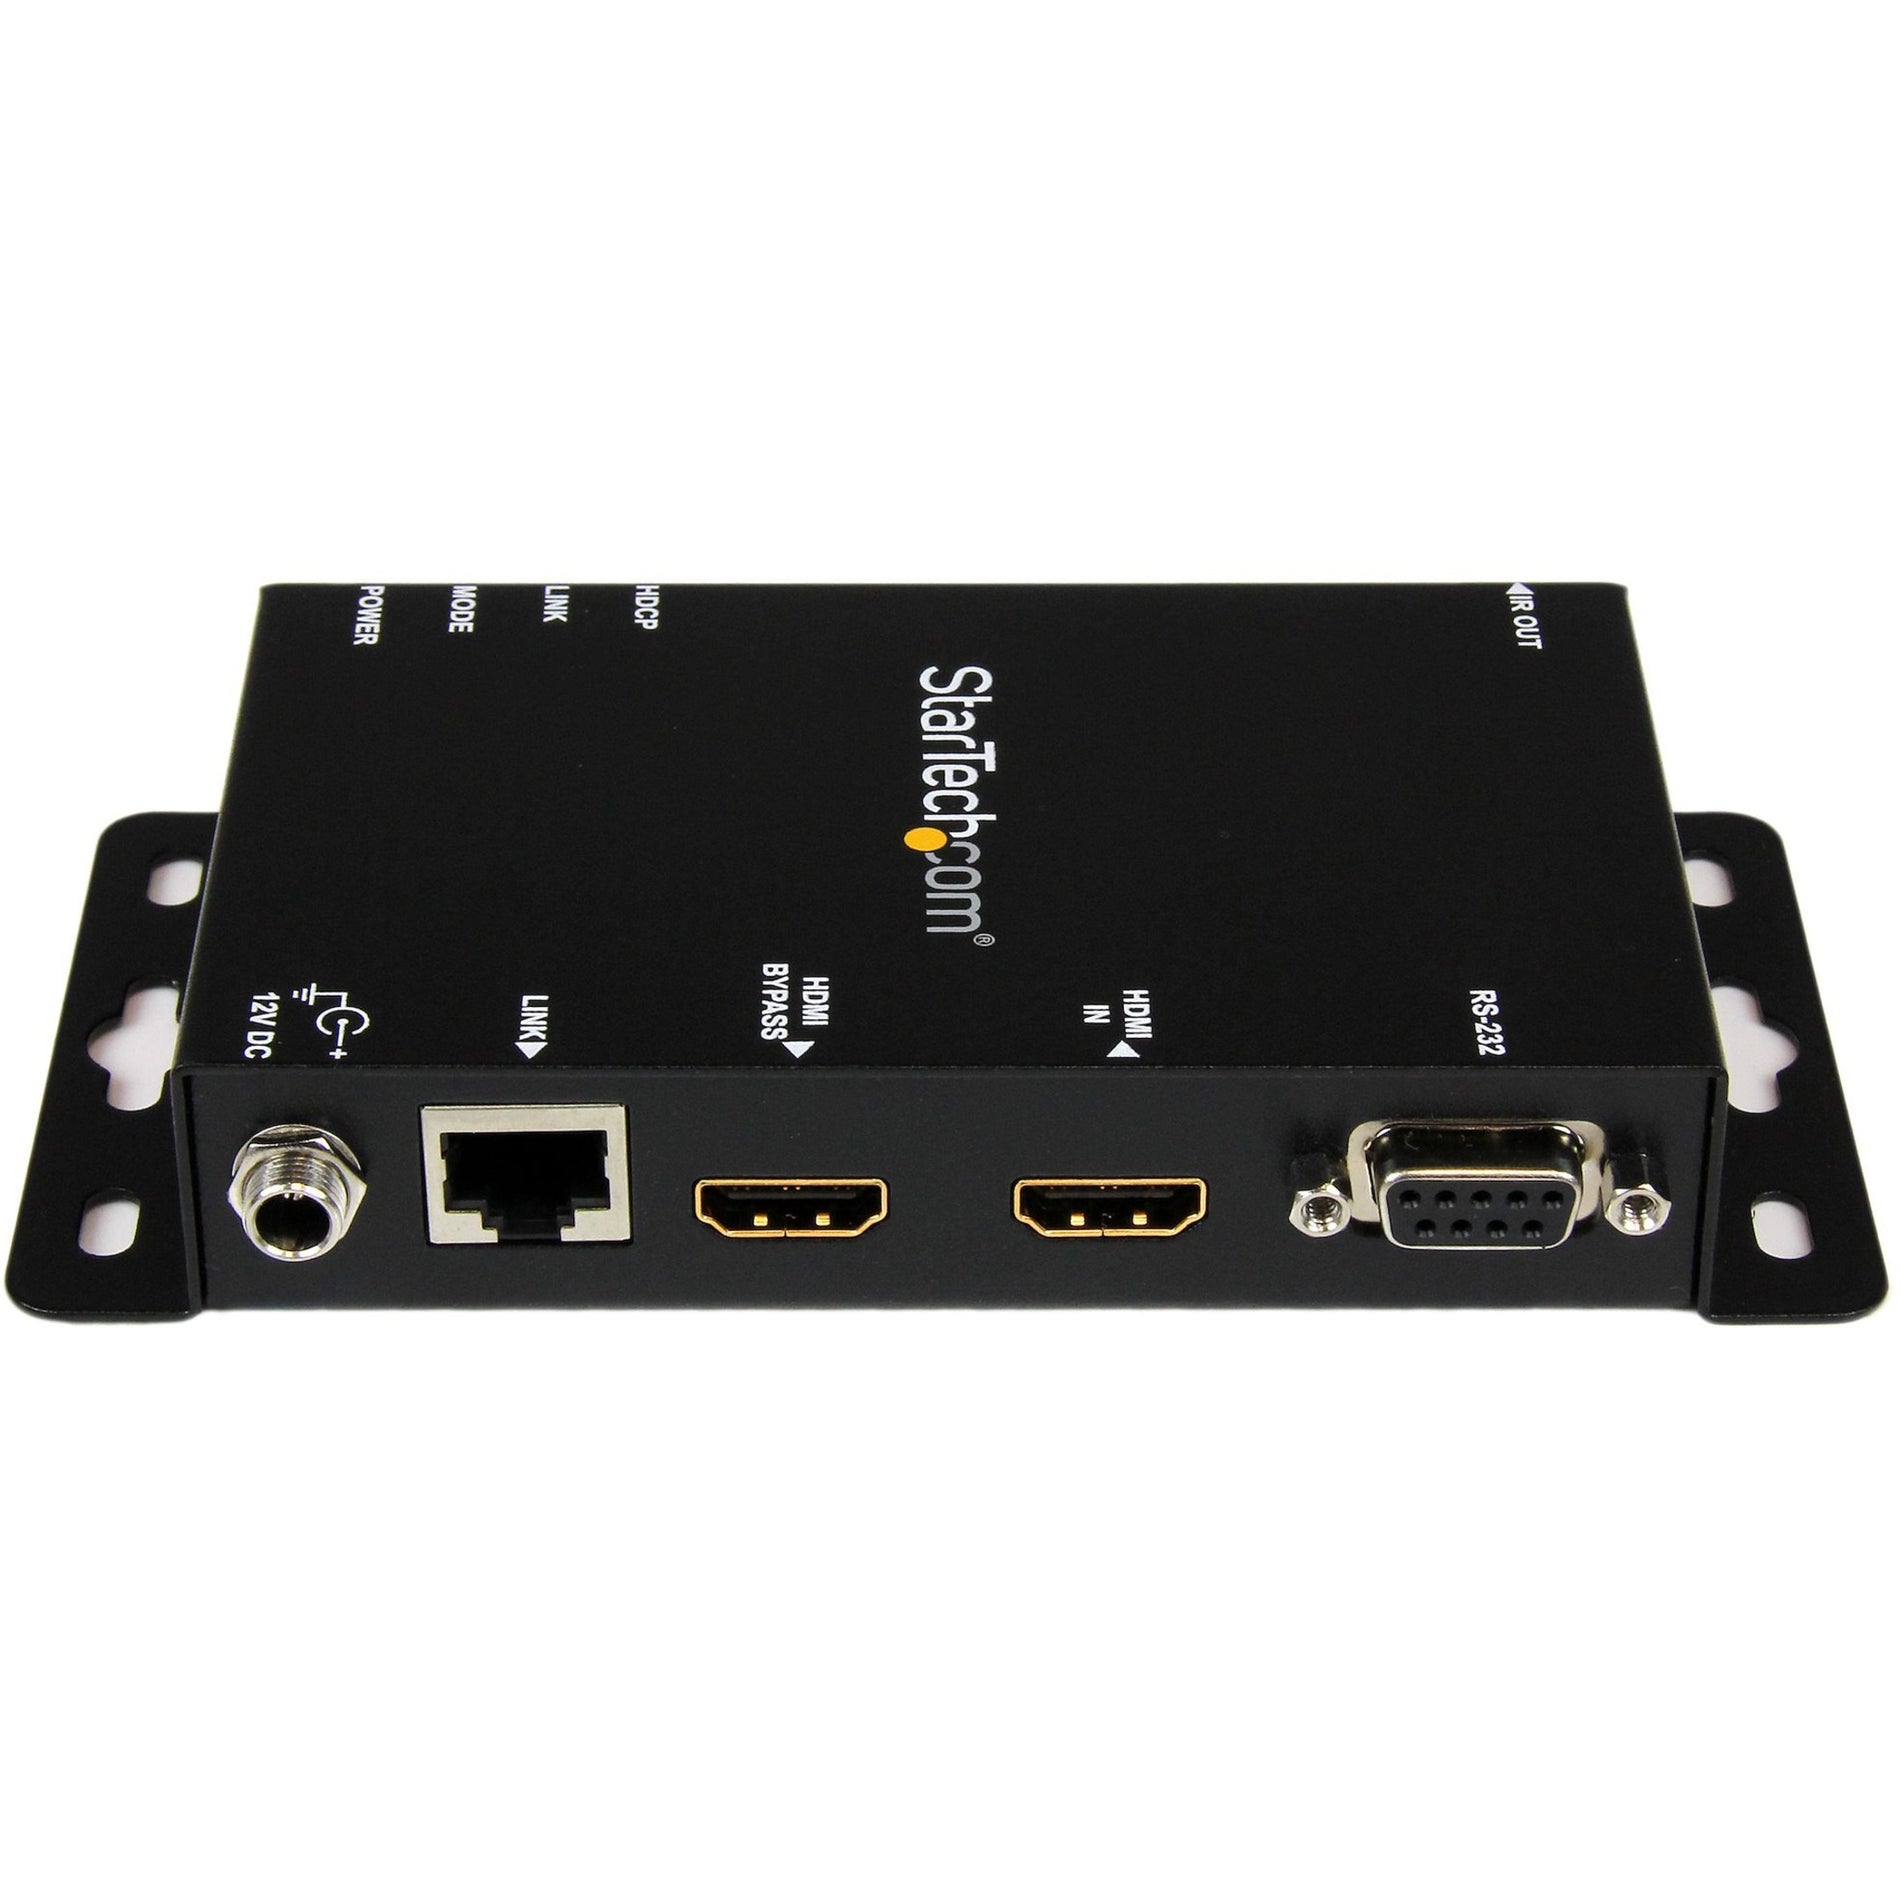 StarTech.com ST121UTPHD2 HDMI over Cat5 Video Extender with Audio - Extend 4K HDMI Signals up to 328ft